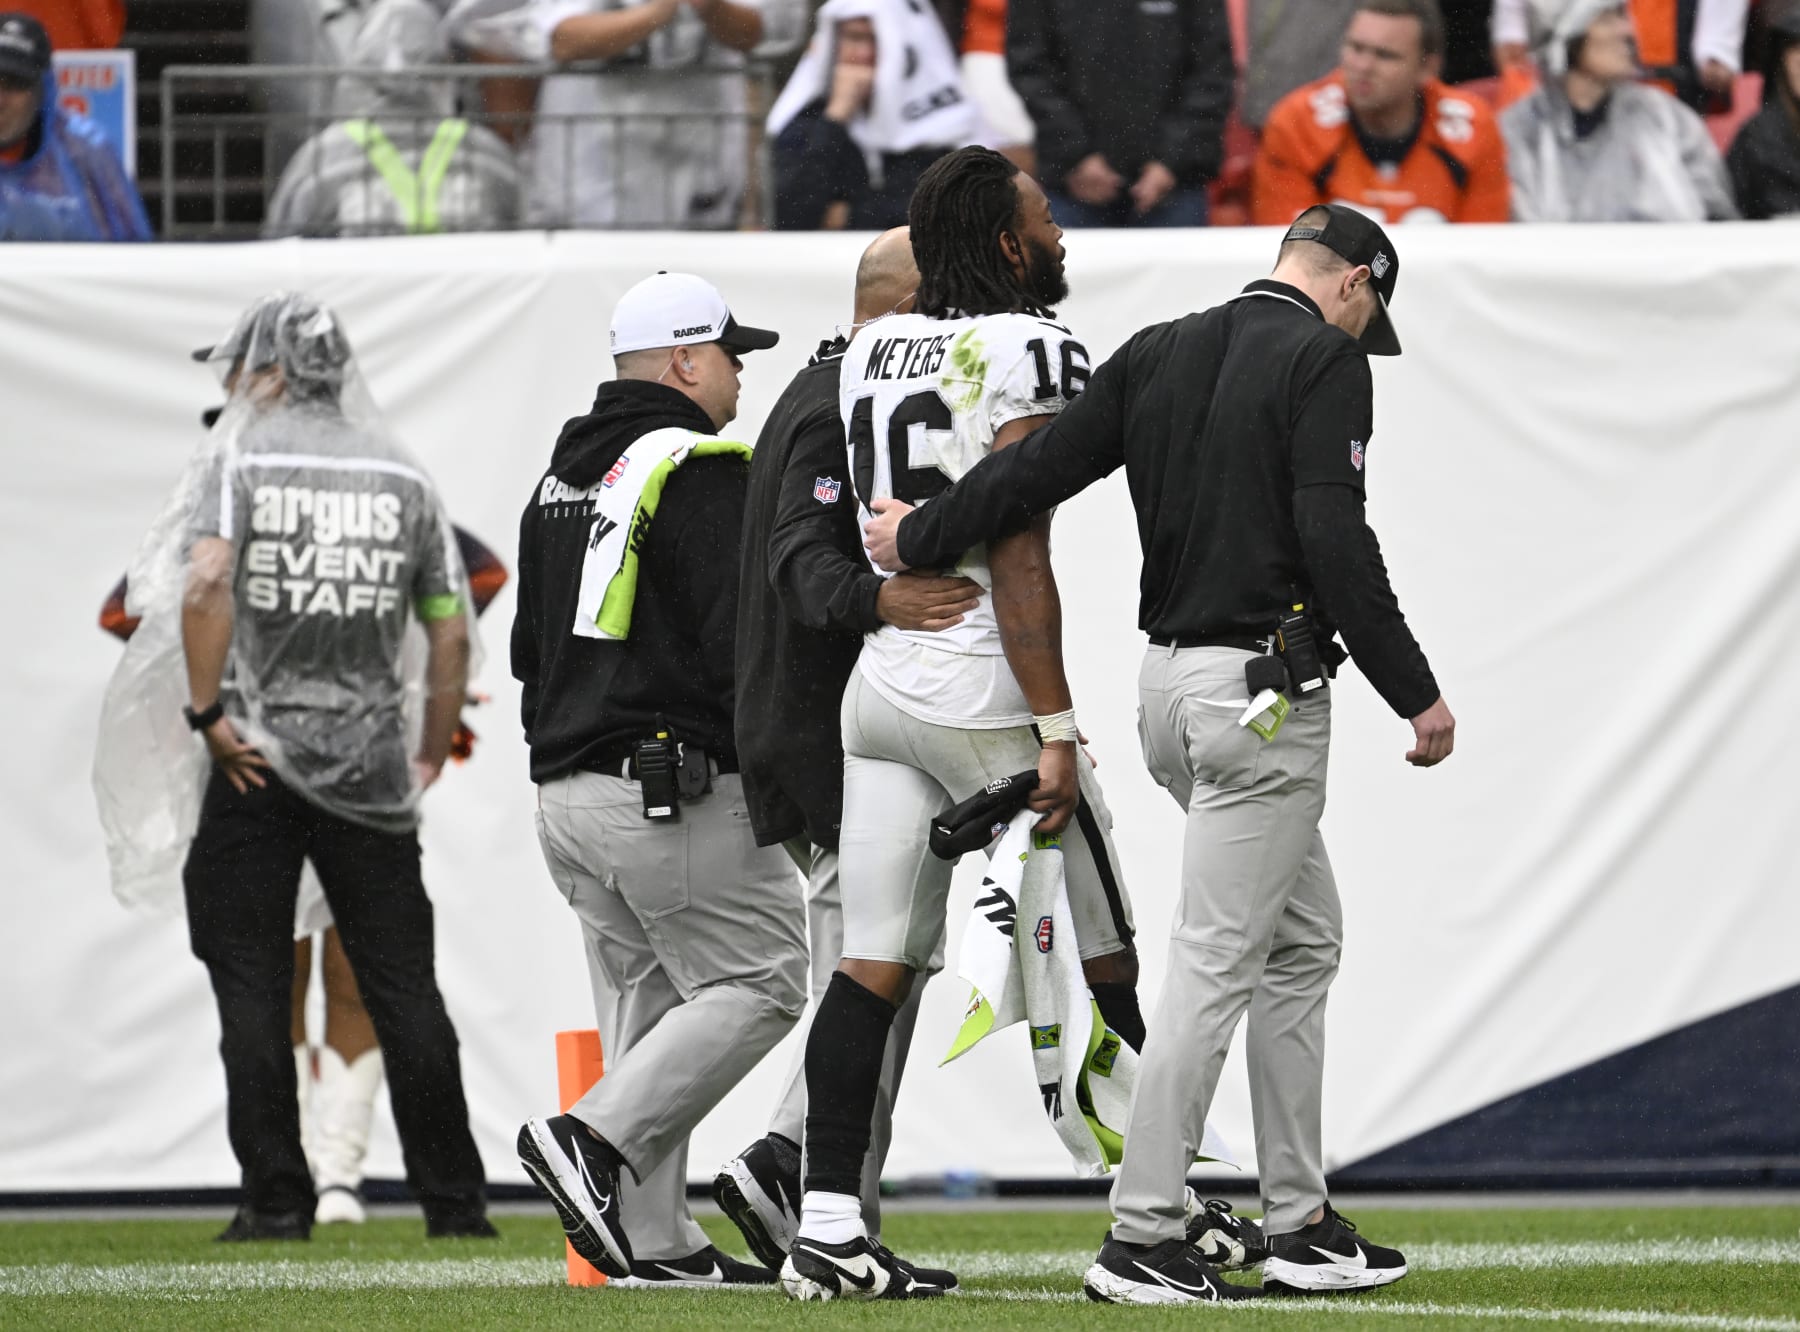 Garoppolo and Meyers spoil Payton's Denver debut in Raiders' 7th